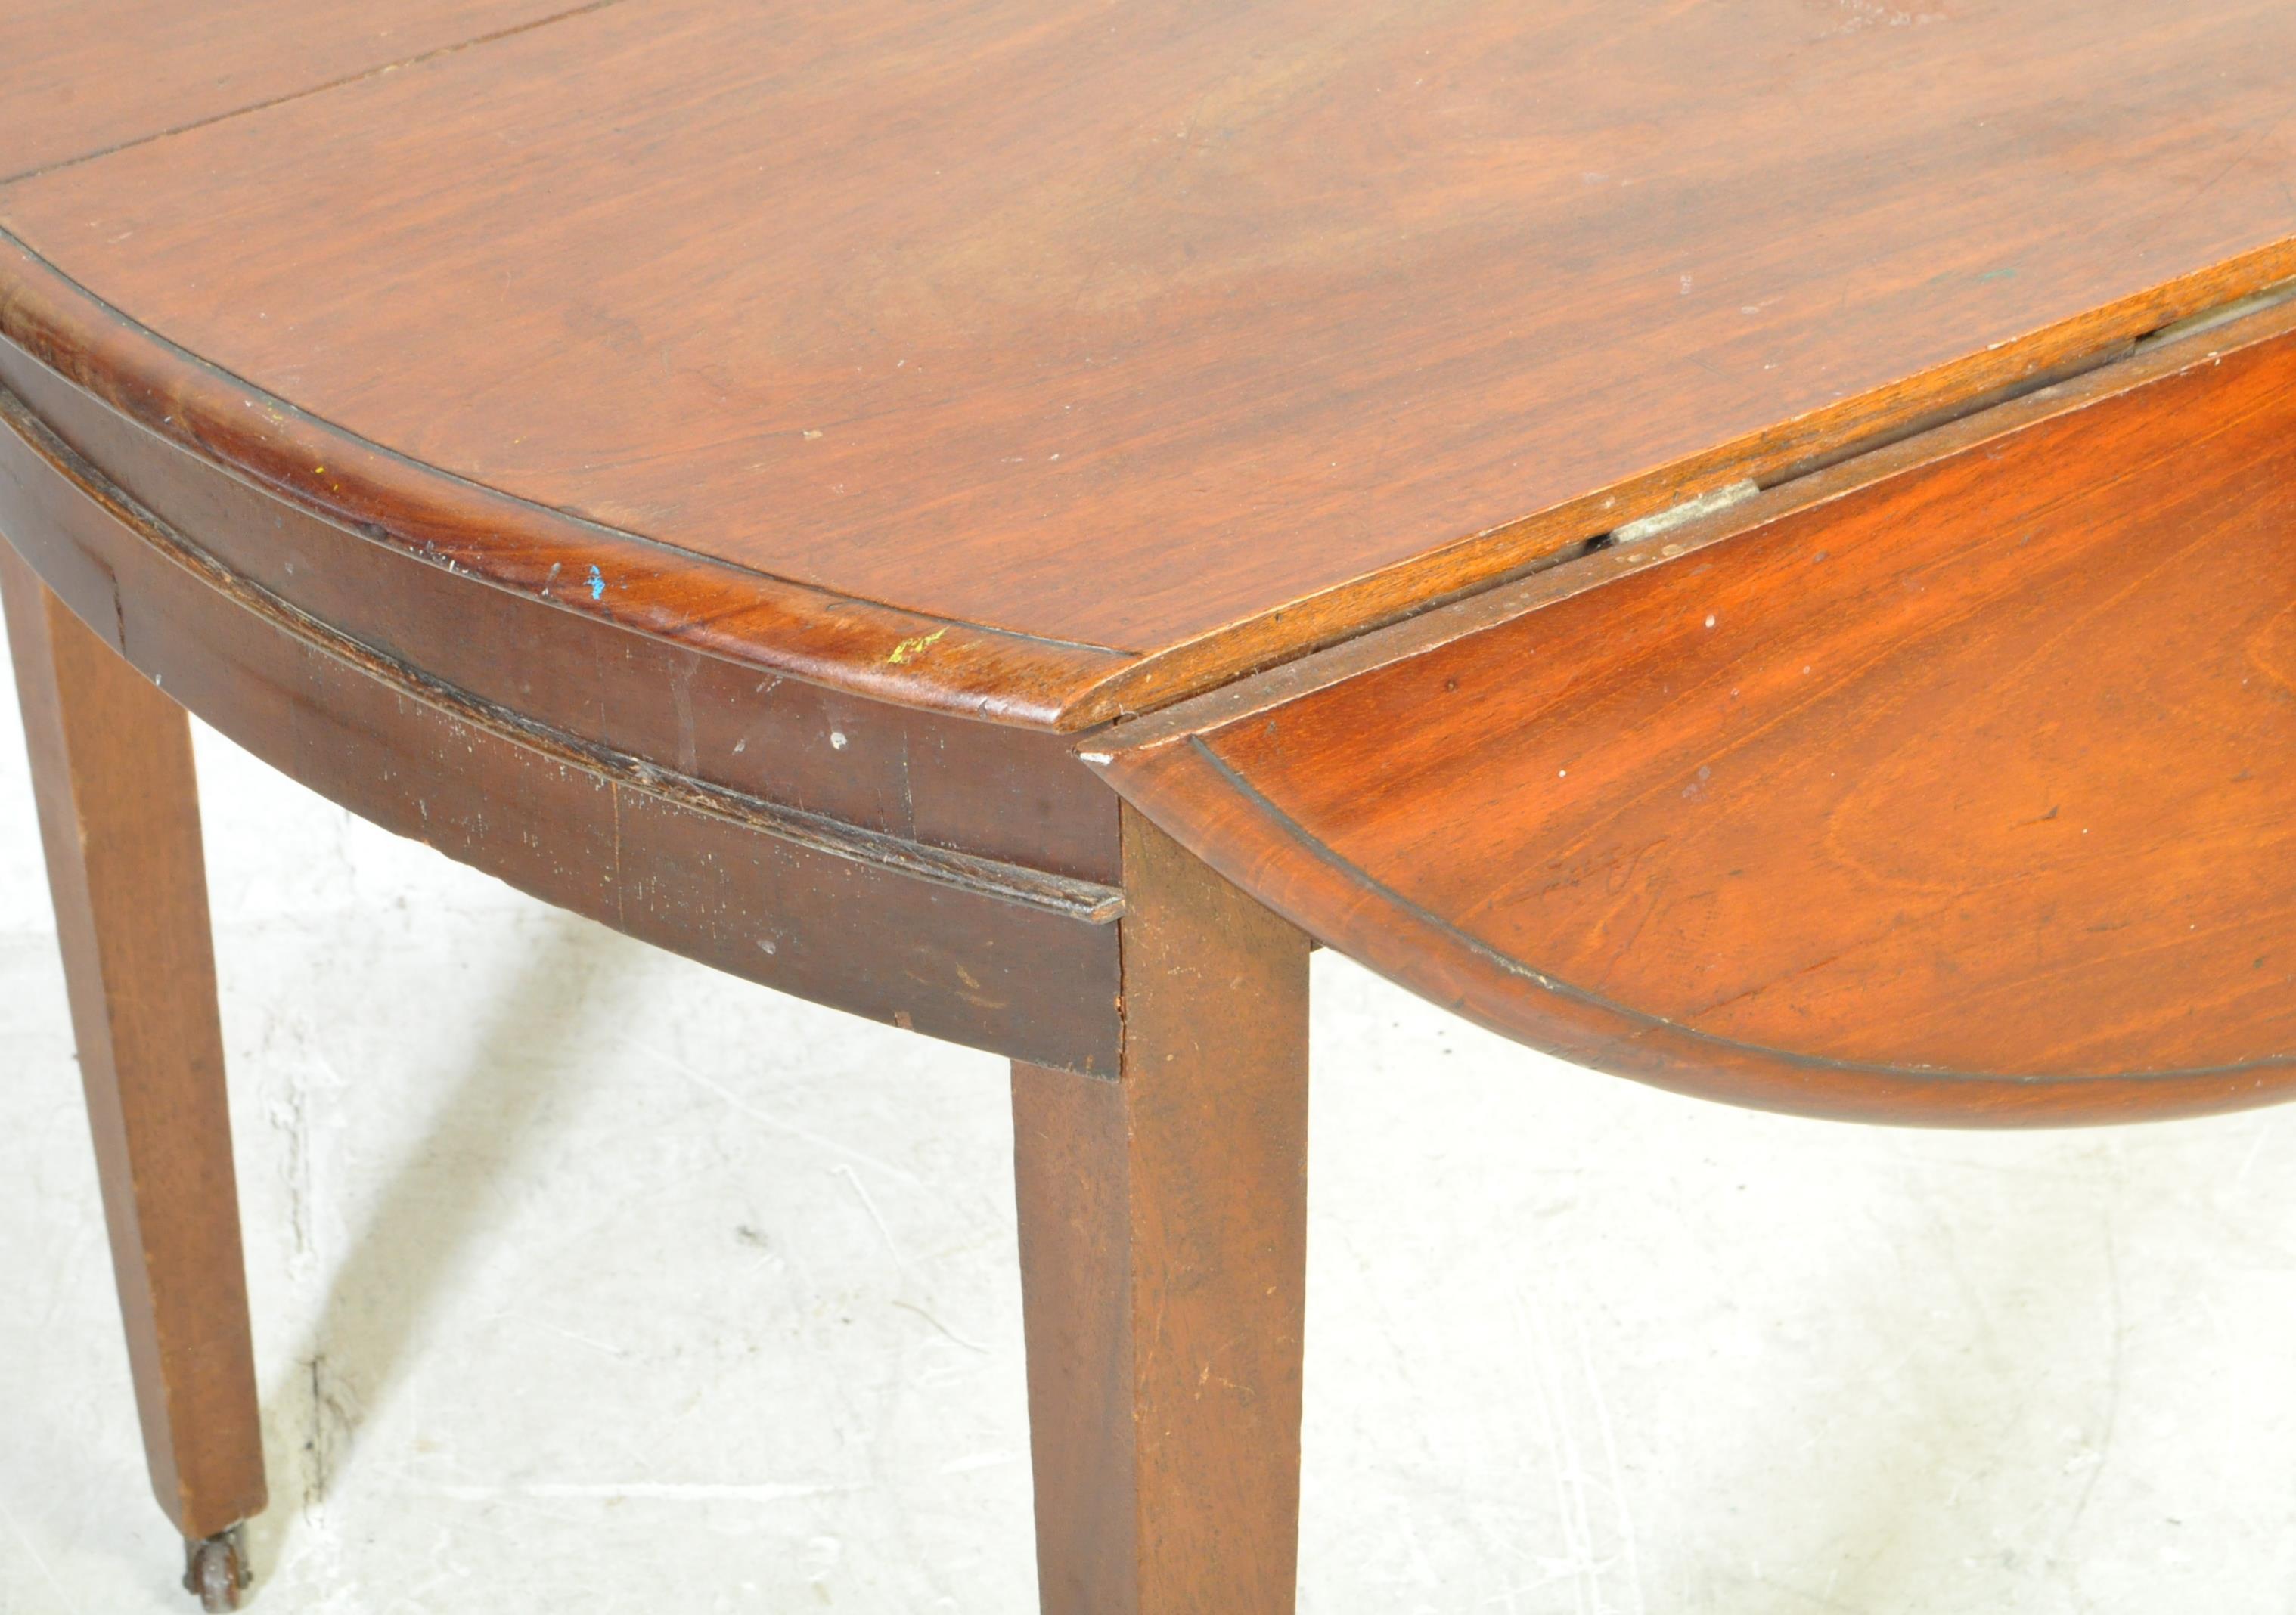 19TH CRNTURY FRENCH PROVINCIAL CHERRYWOOD DINING TABLE - Image 3 of 4